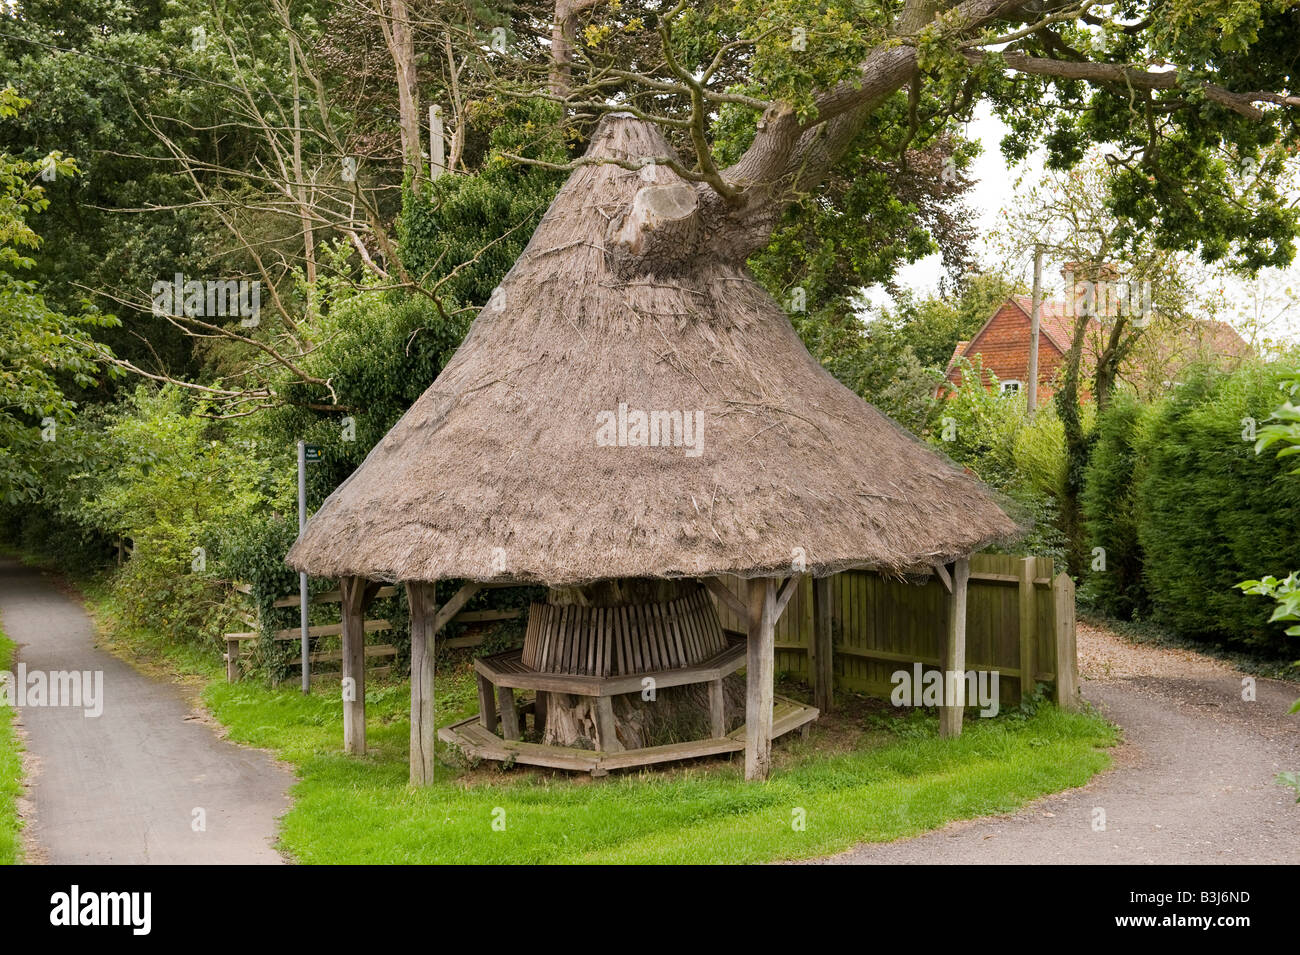 The Mushroom Tree, East Claydon and Botolph Claydon, Buckinghamshire, UK. A thatched shelter built around a tree trunk Stock Photo